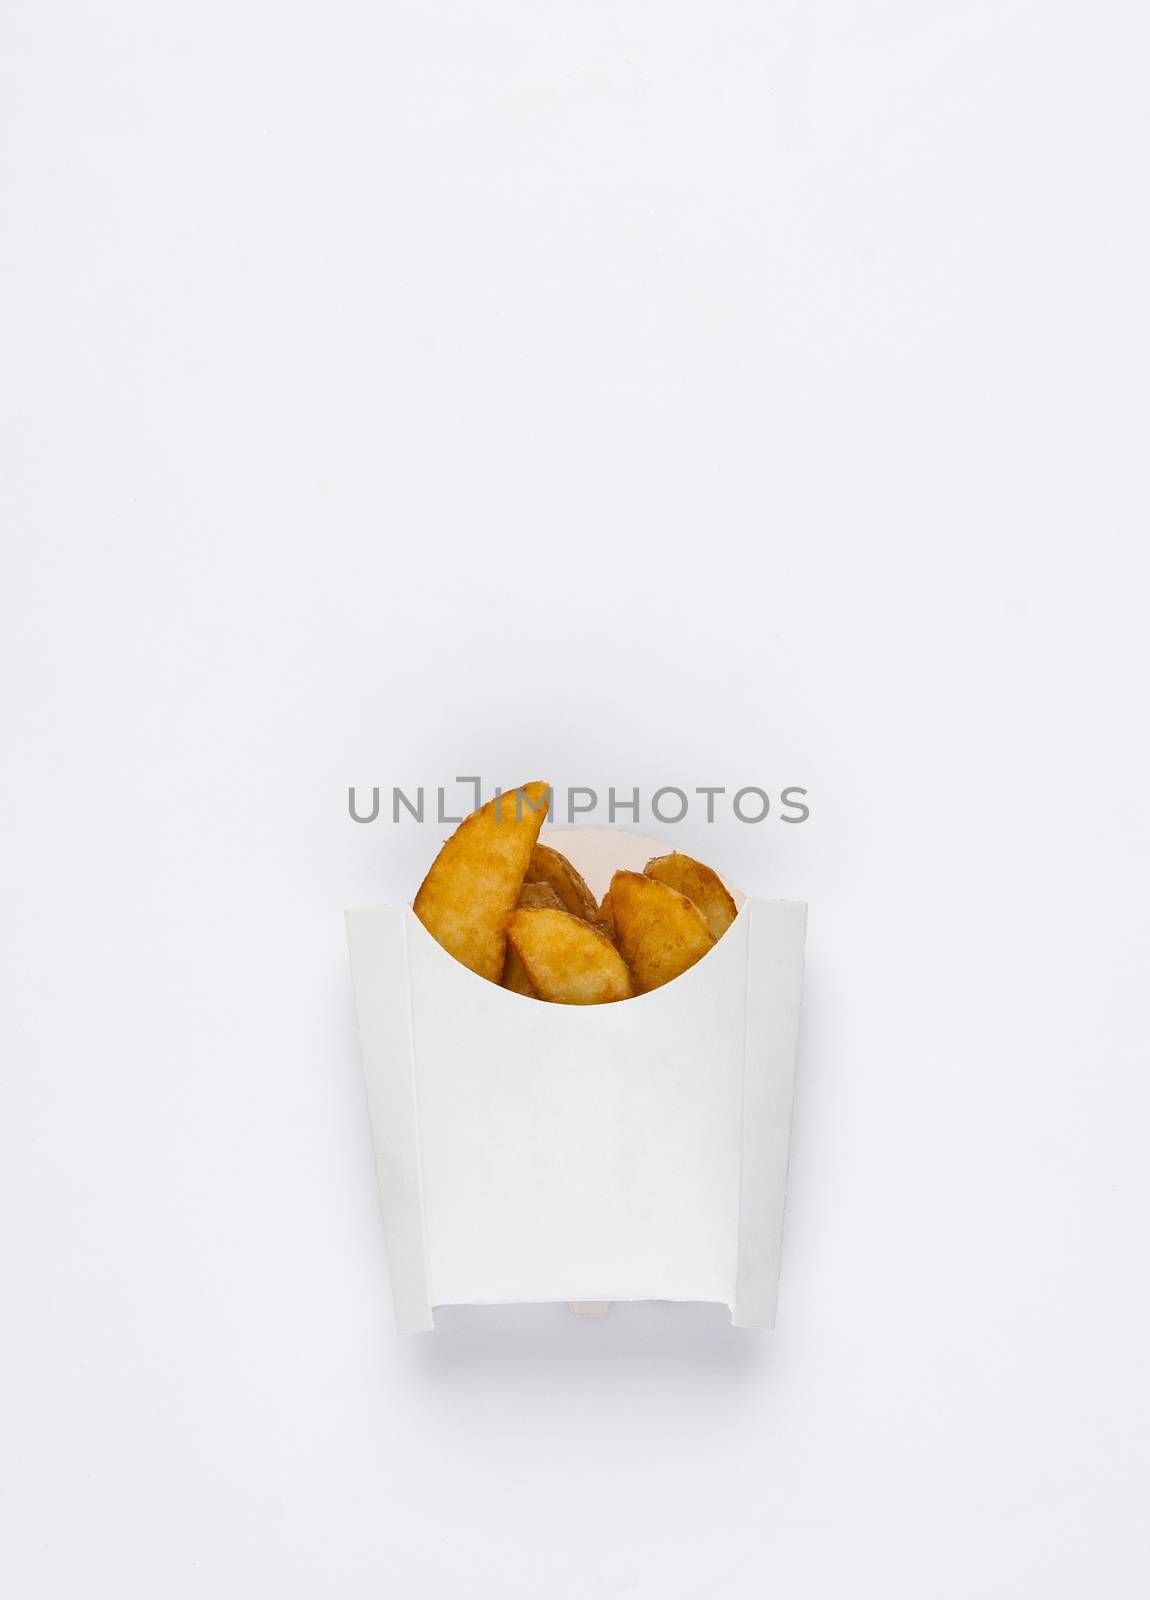 slices of fried potatoes in a white box on a white background. studio photo of fried french fries on white background